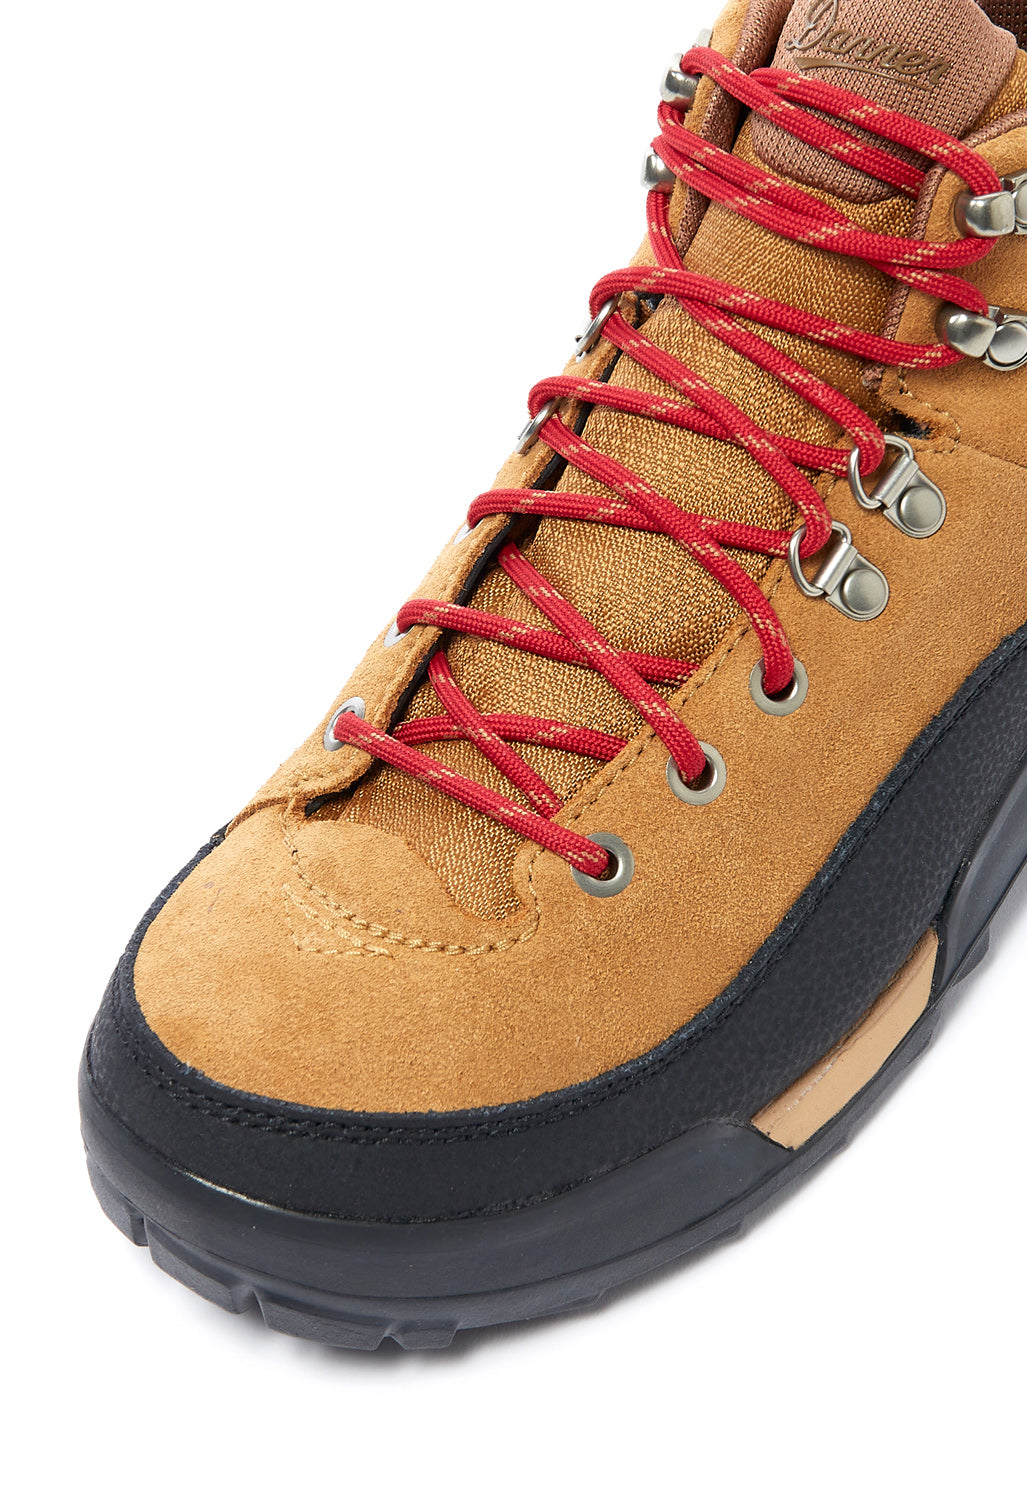 Danner Women's Panorama Mid Boots - Brown / Red